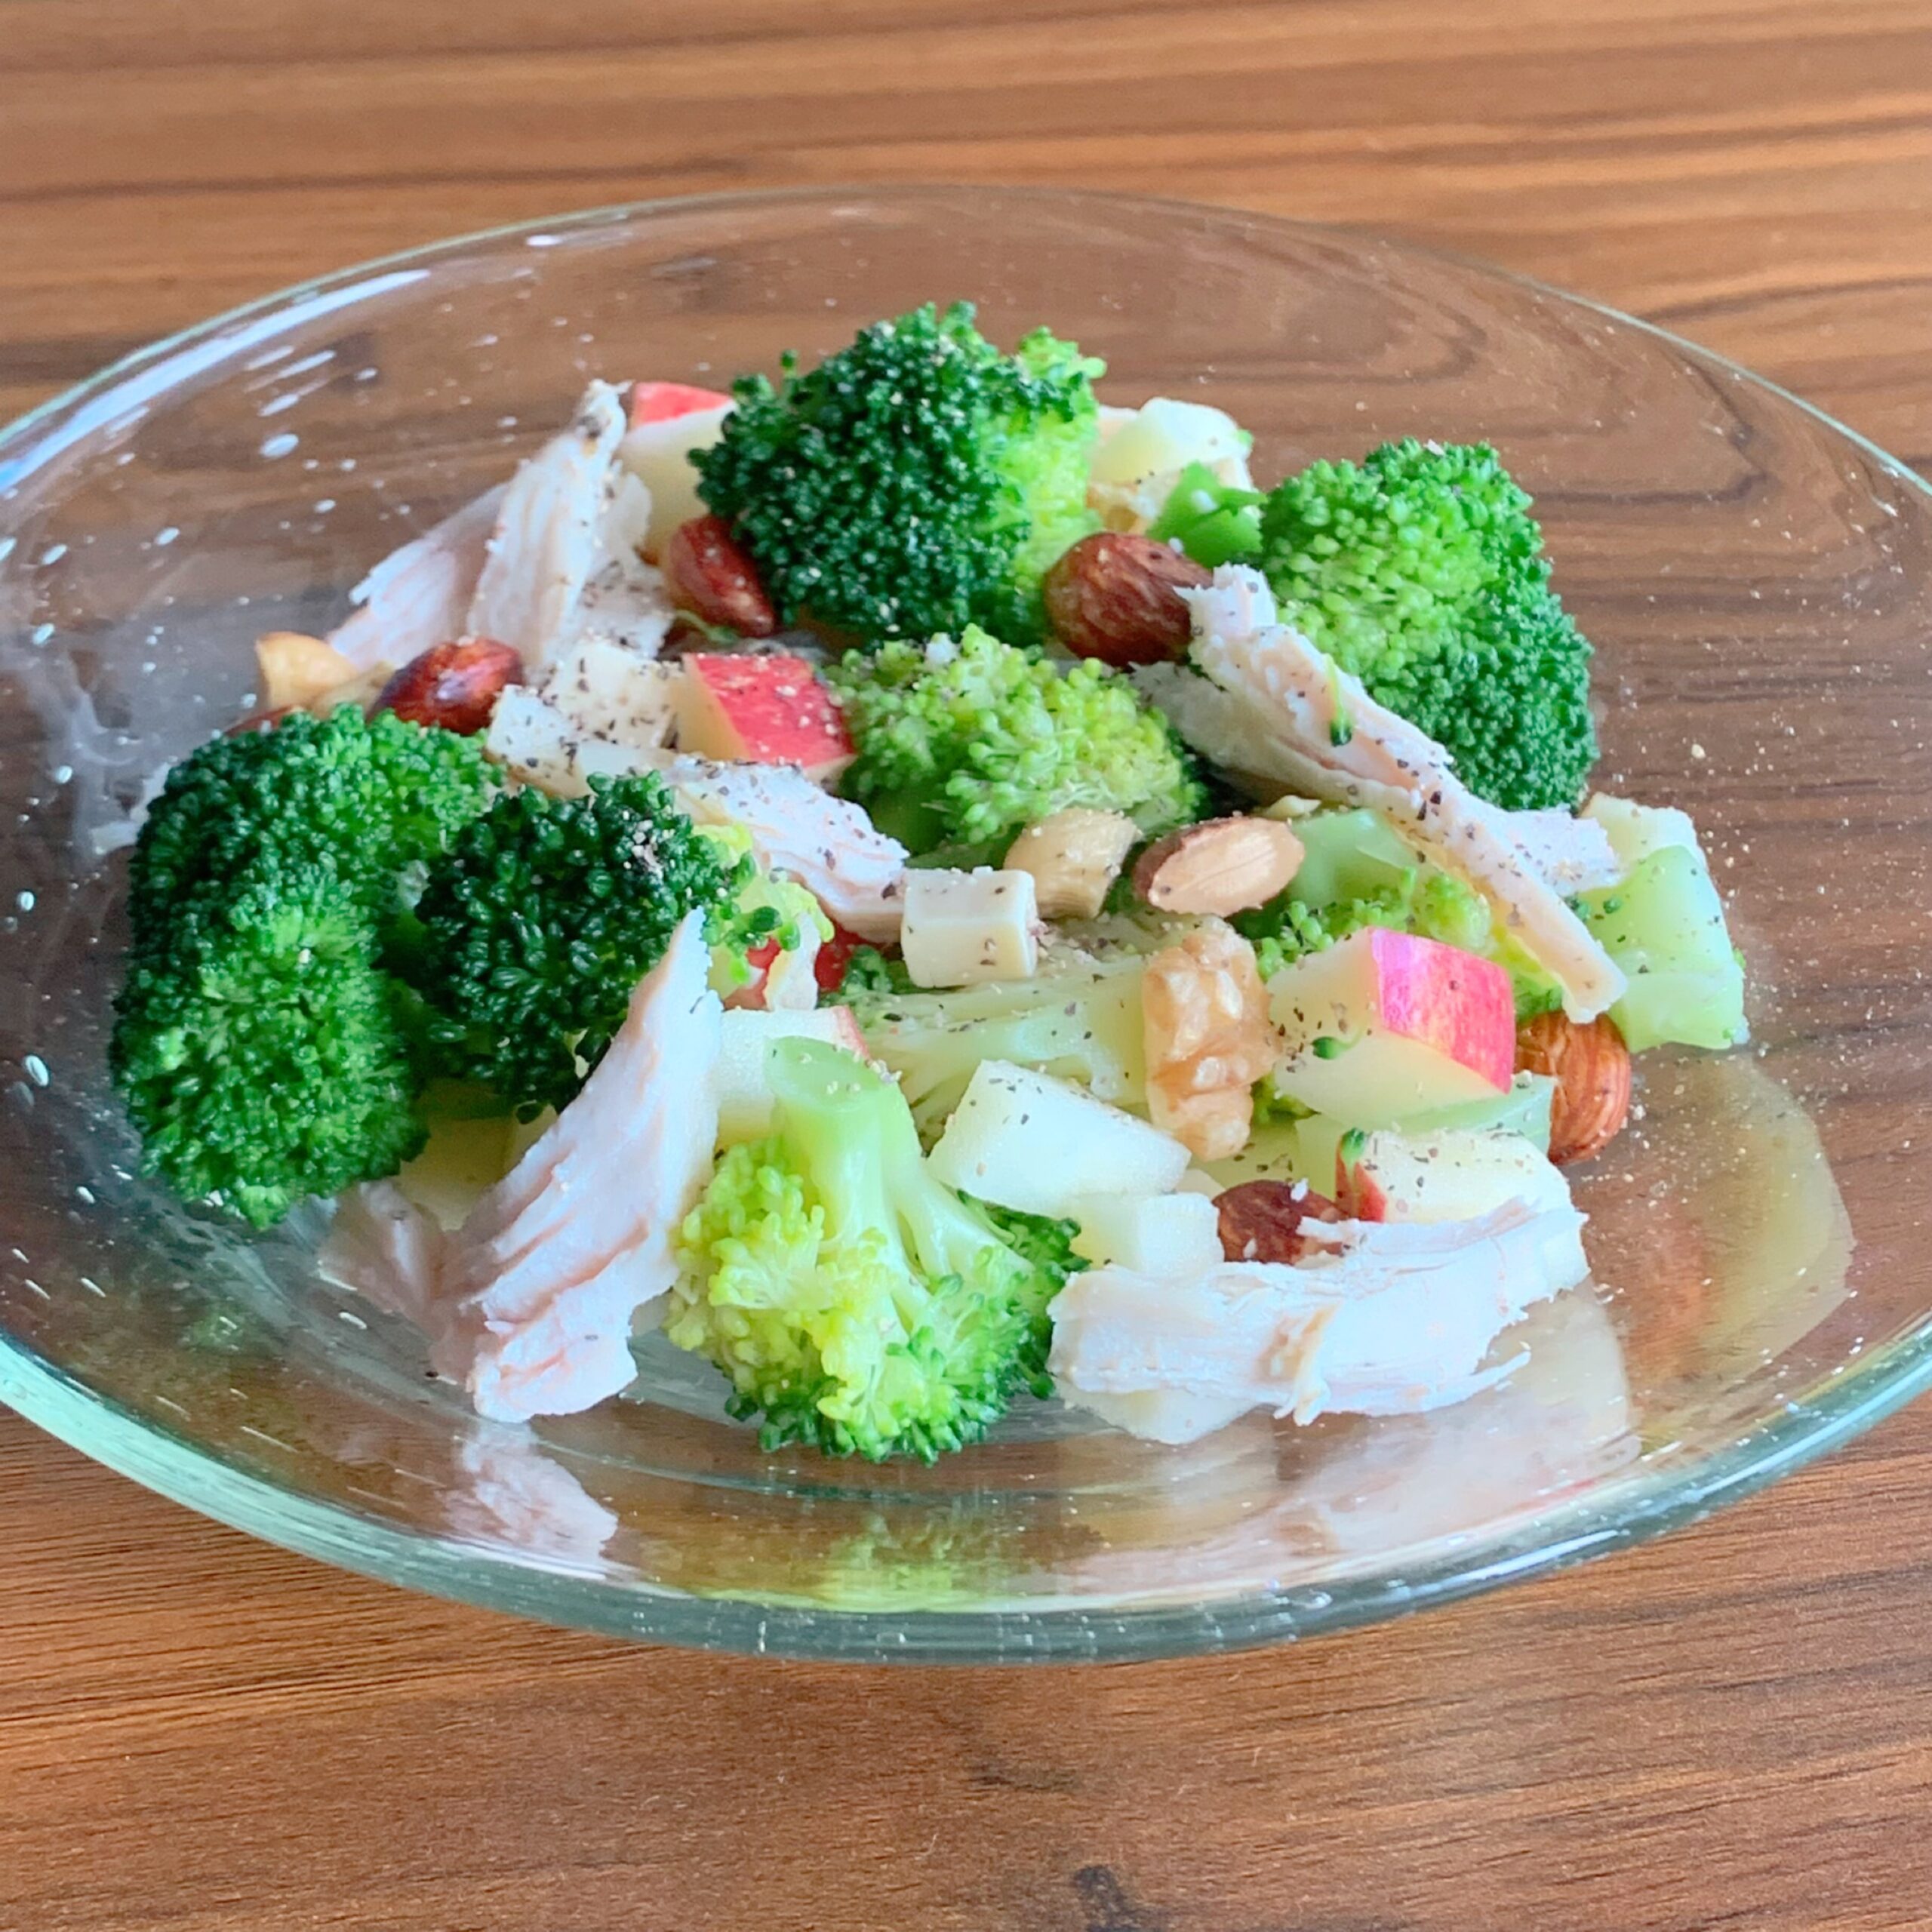 A salad made with steamed chicken, broccoli, apples, and nuts. 